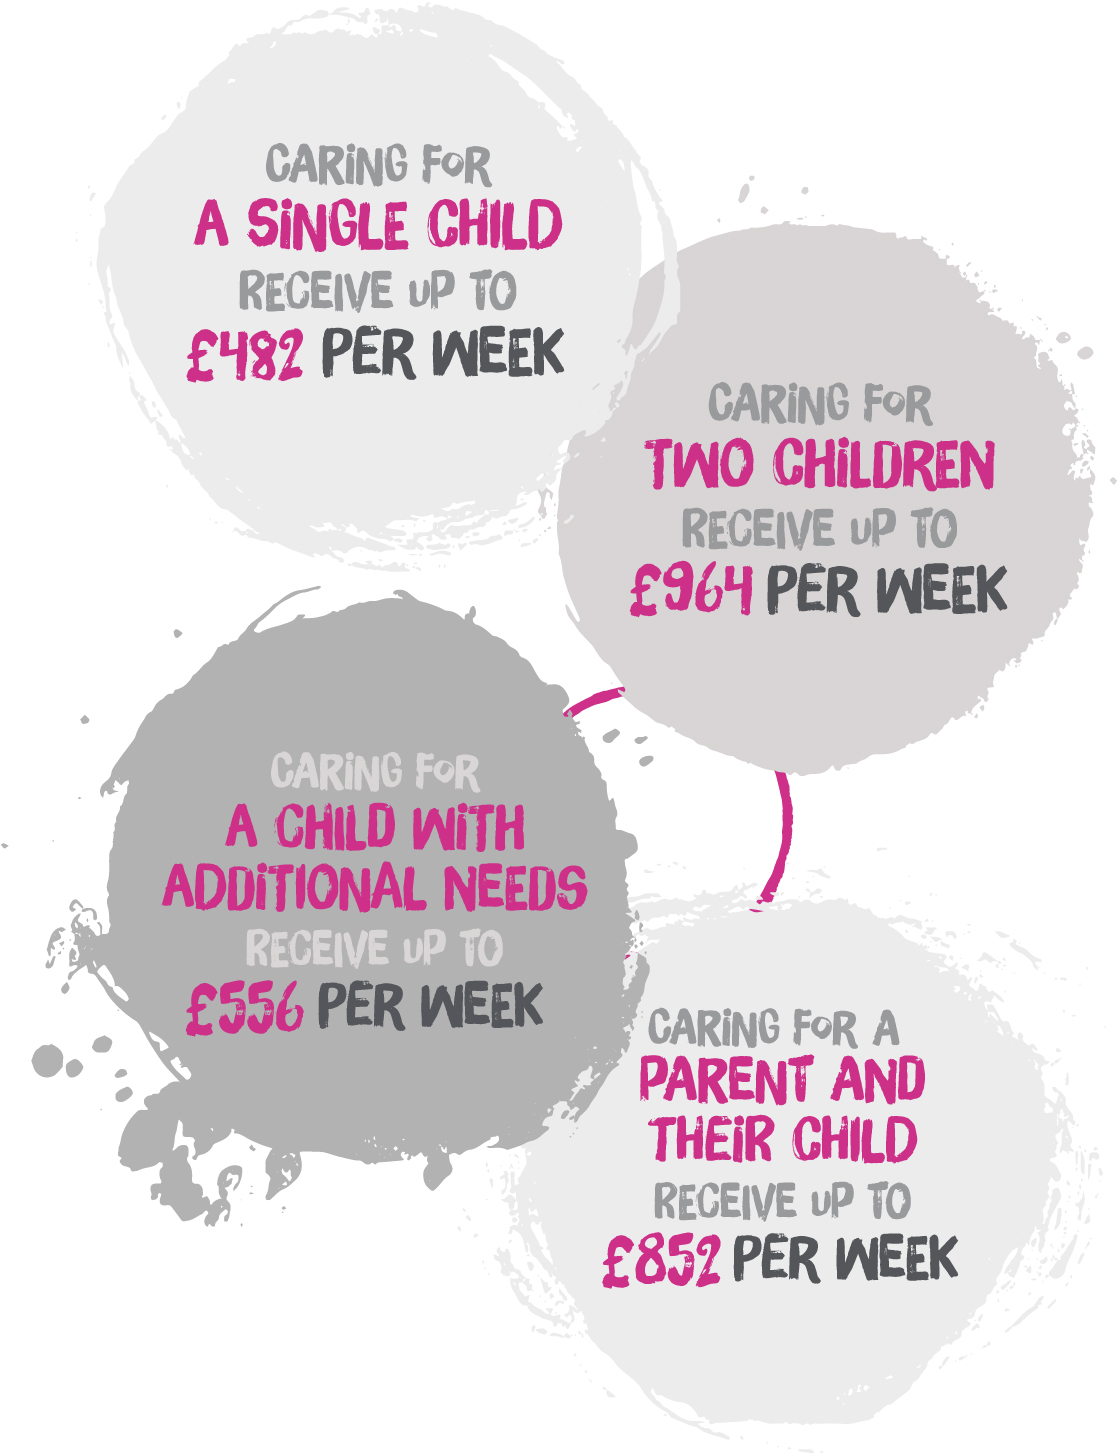 These are our fees if you're thinking of fostering in Lewisham